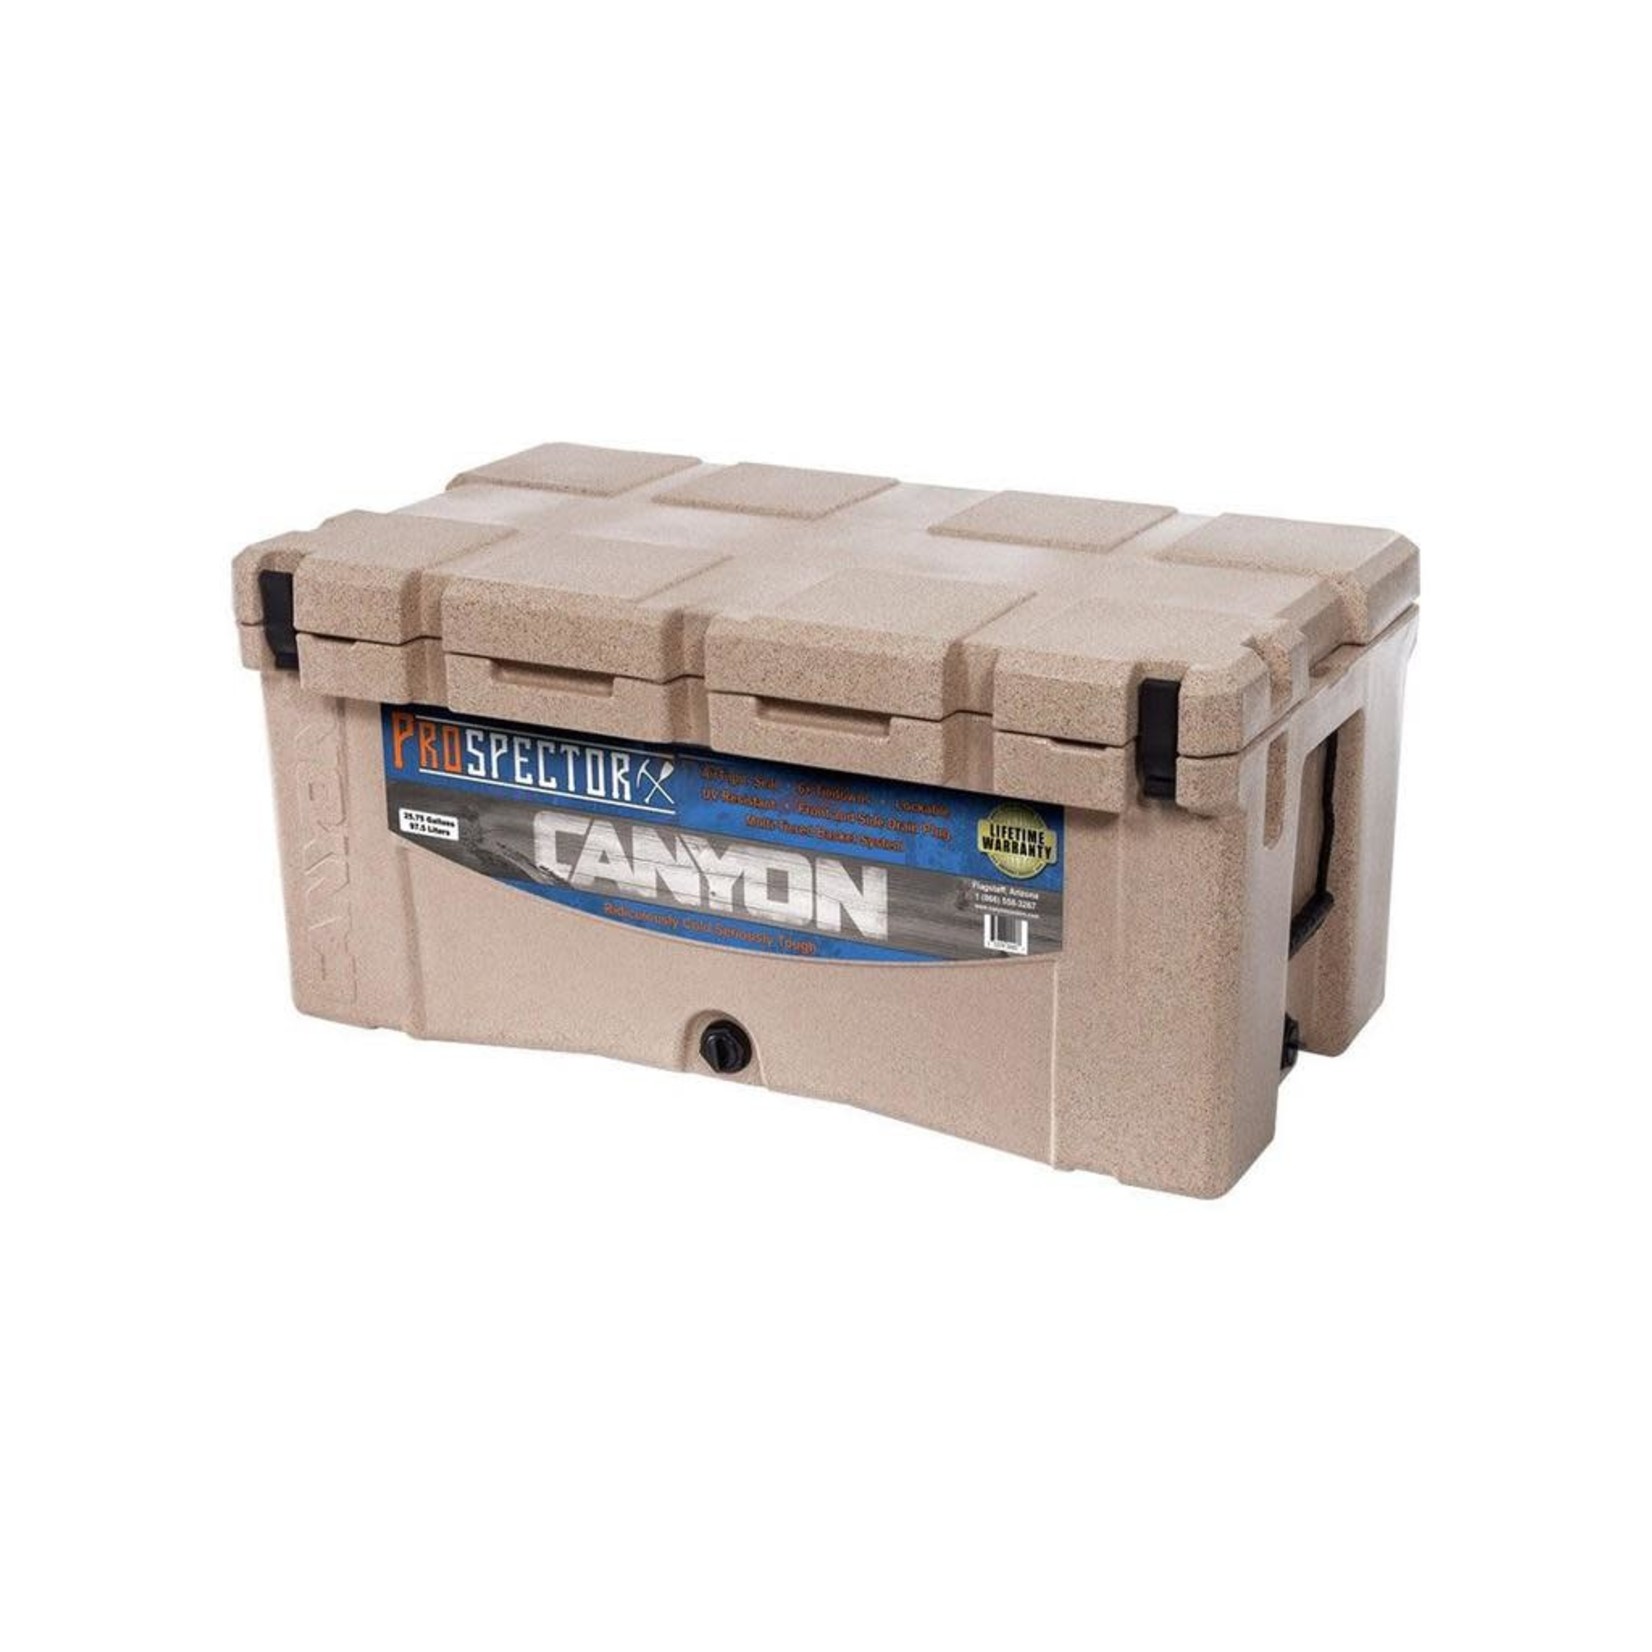 Canyon Coolers Canyon Coolers, Prospector 103